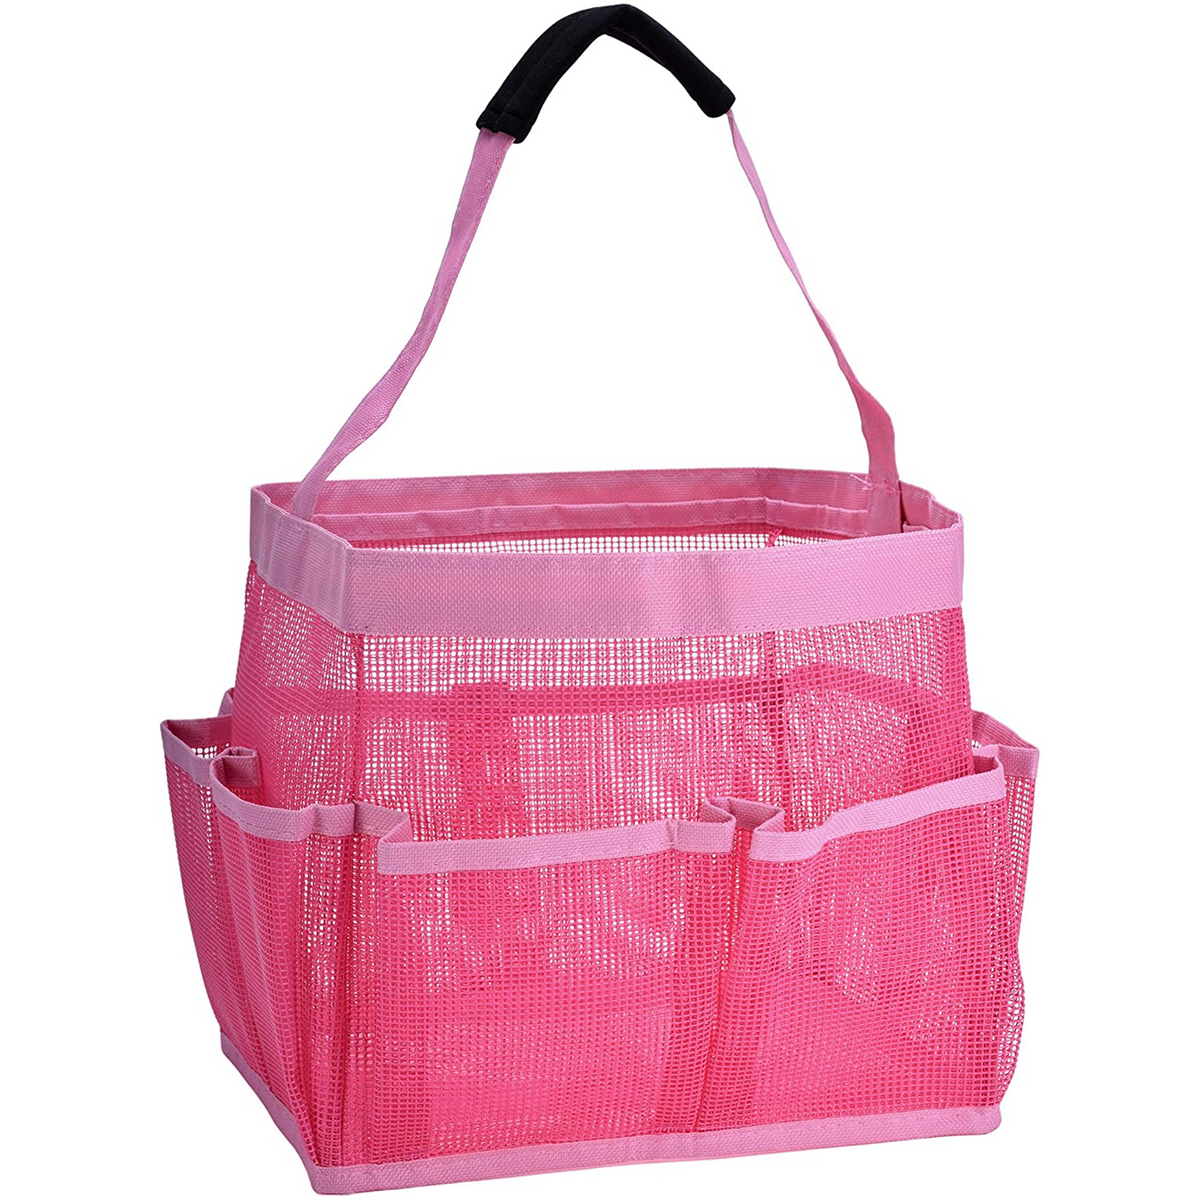 Yescom Portable Mesh Shower Caddy Tote 8 Pockets Bathroom Carry Bag Pink/Black  Opt, 1 - Fry's Food Stores